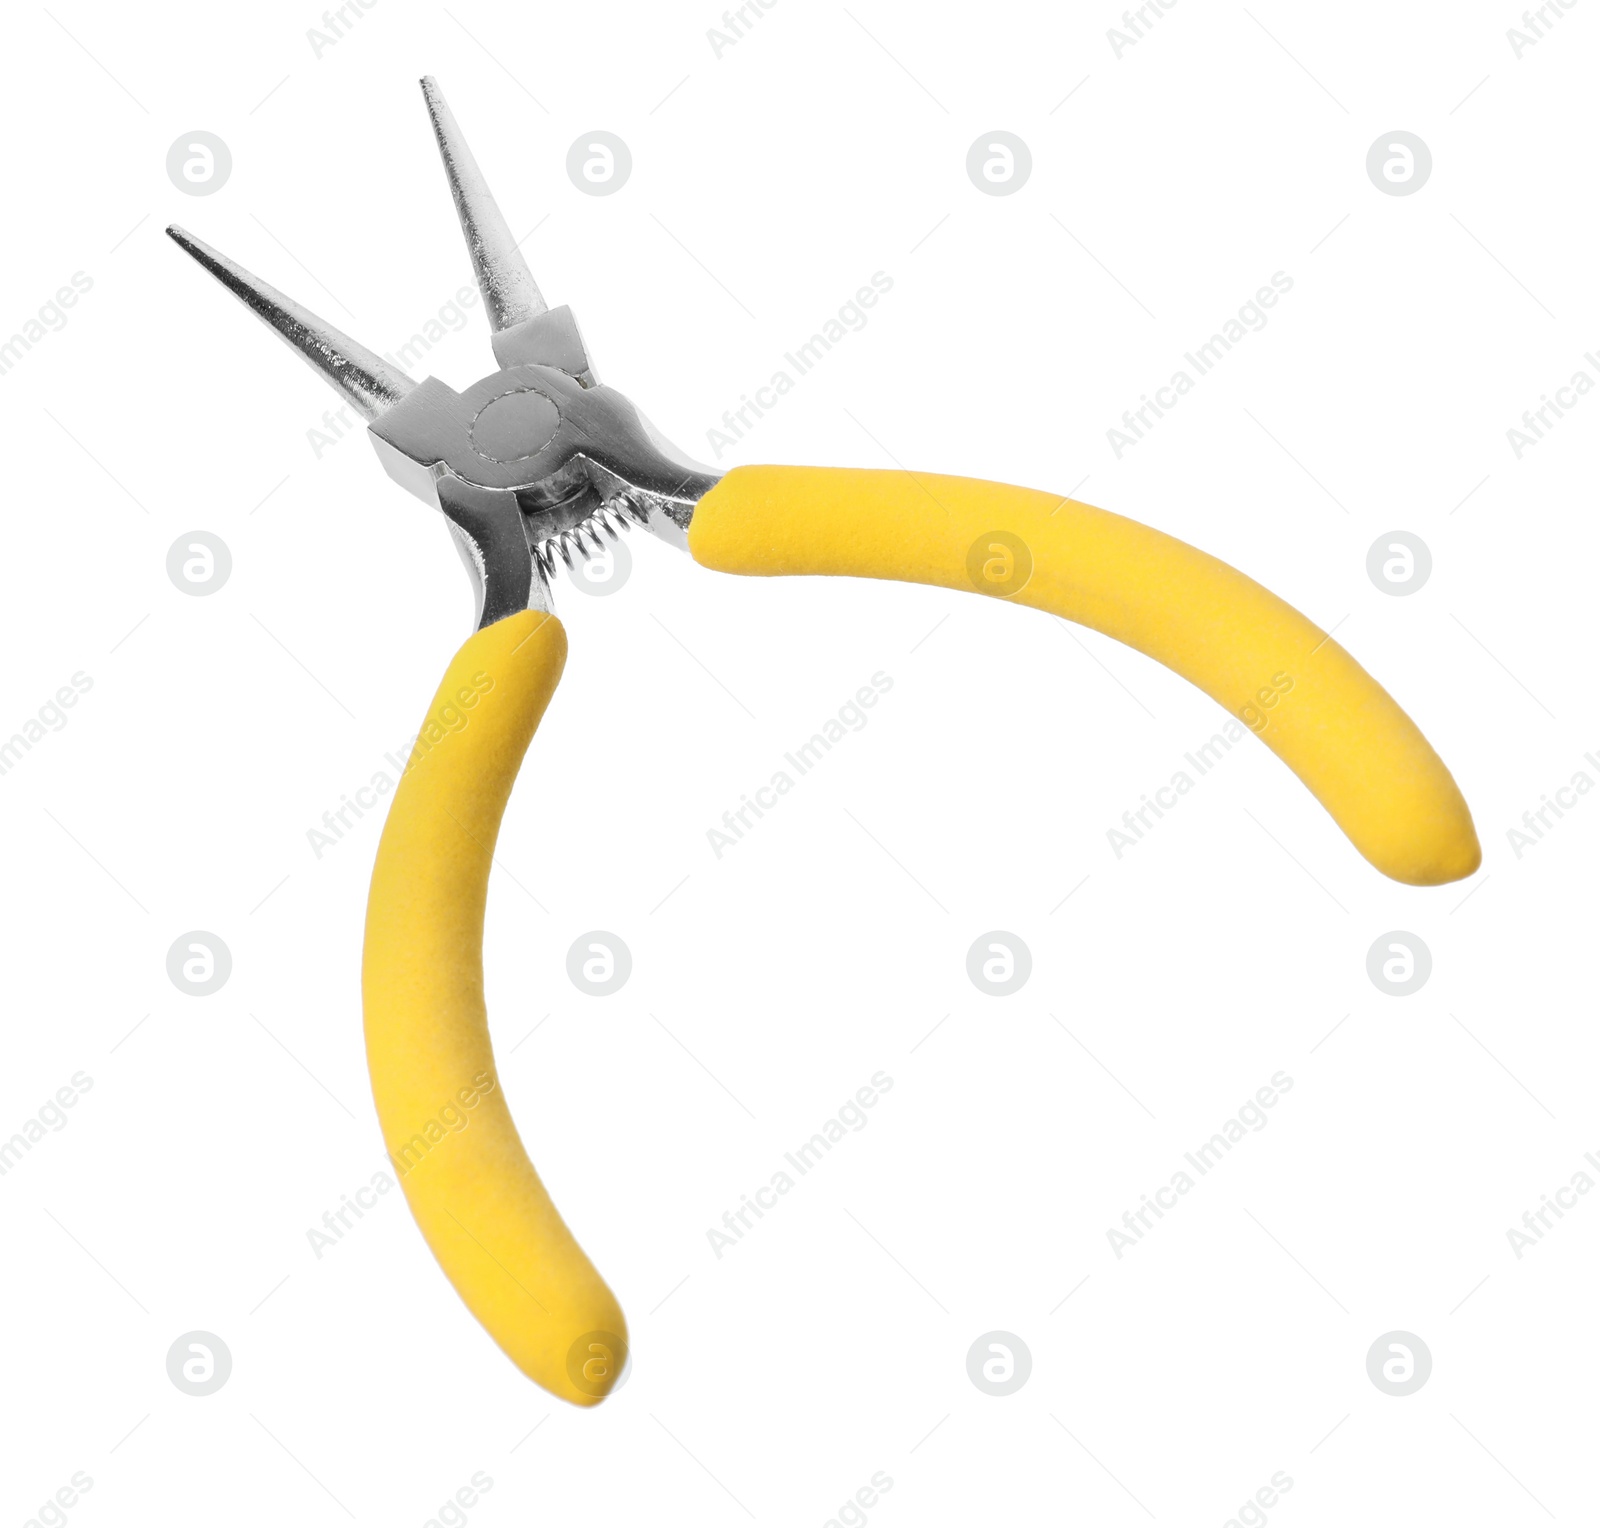 Photo of New round nose pliers isolated on white